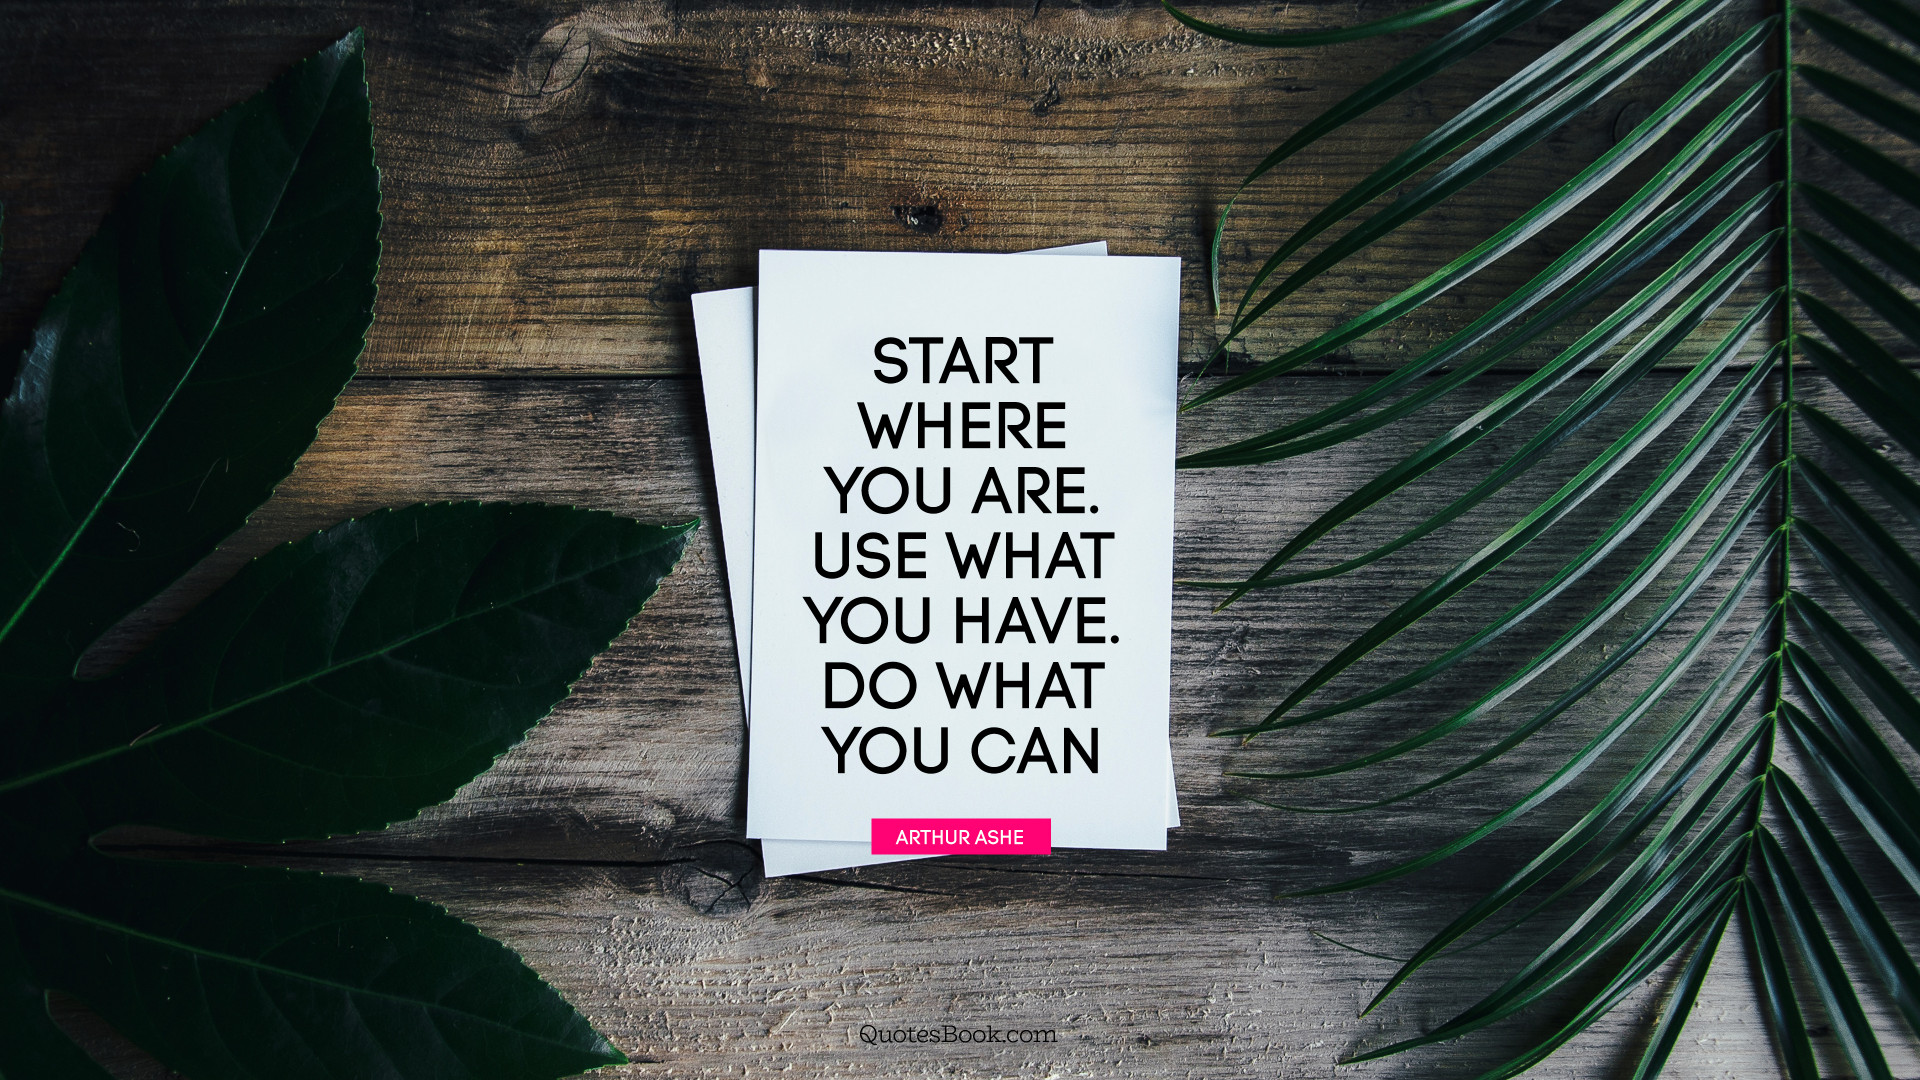 Start where you are. Use what you have. Do what you can. - Quote by ...
 We Have Your Back